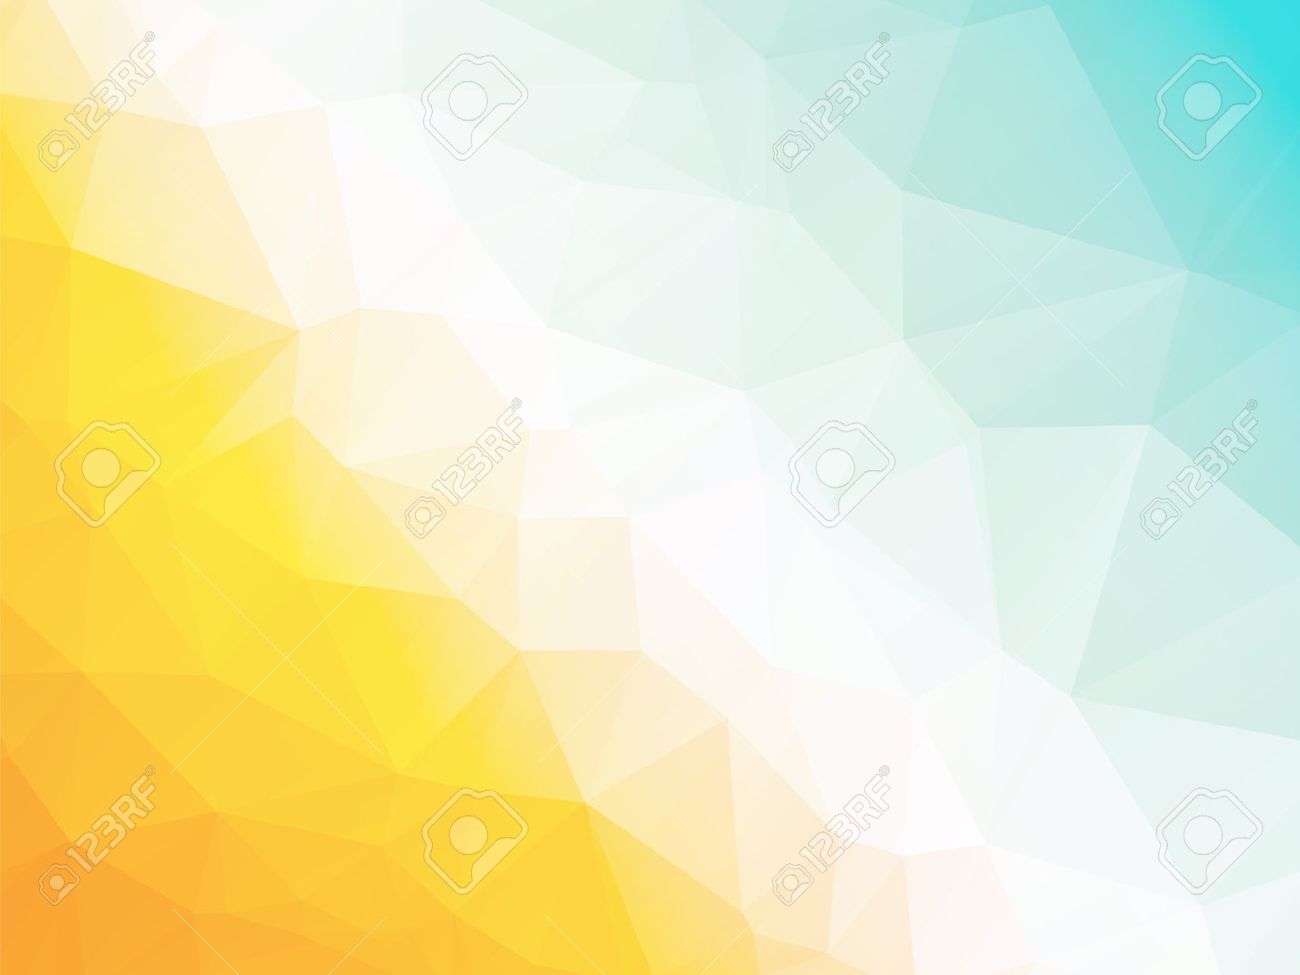 Abstract Geometric Triangle Yellow Blue Hot Summer Background